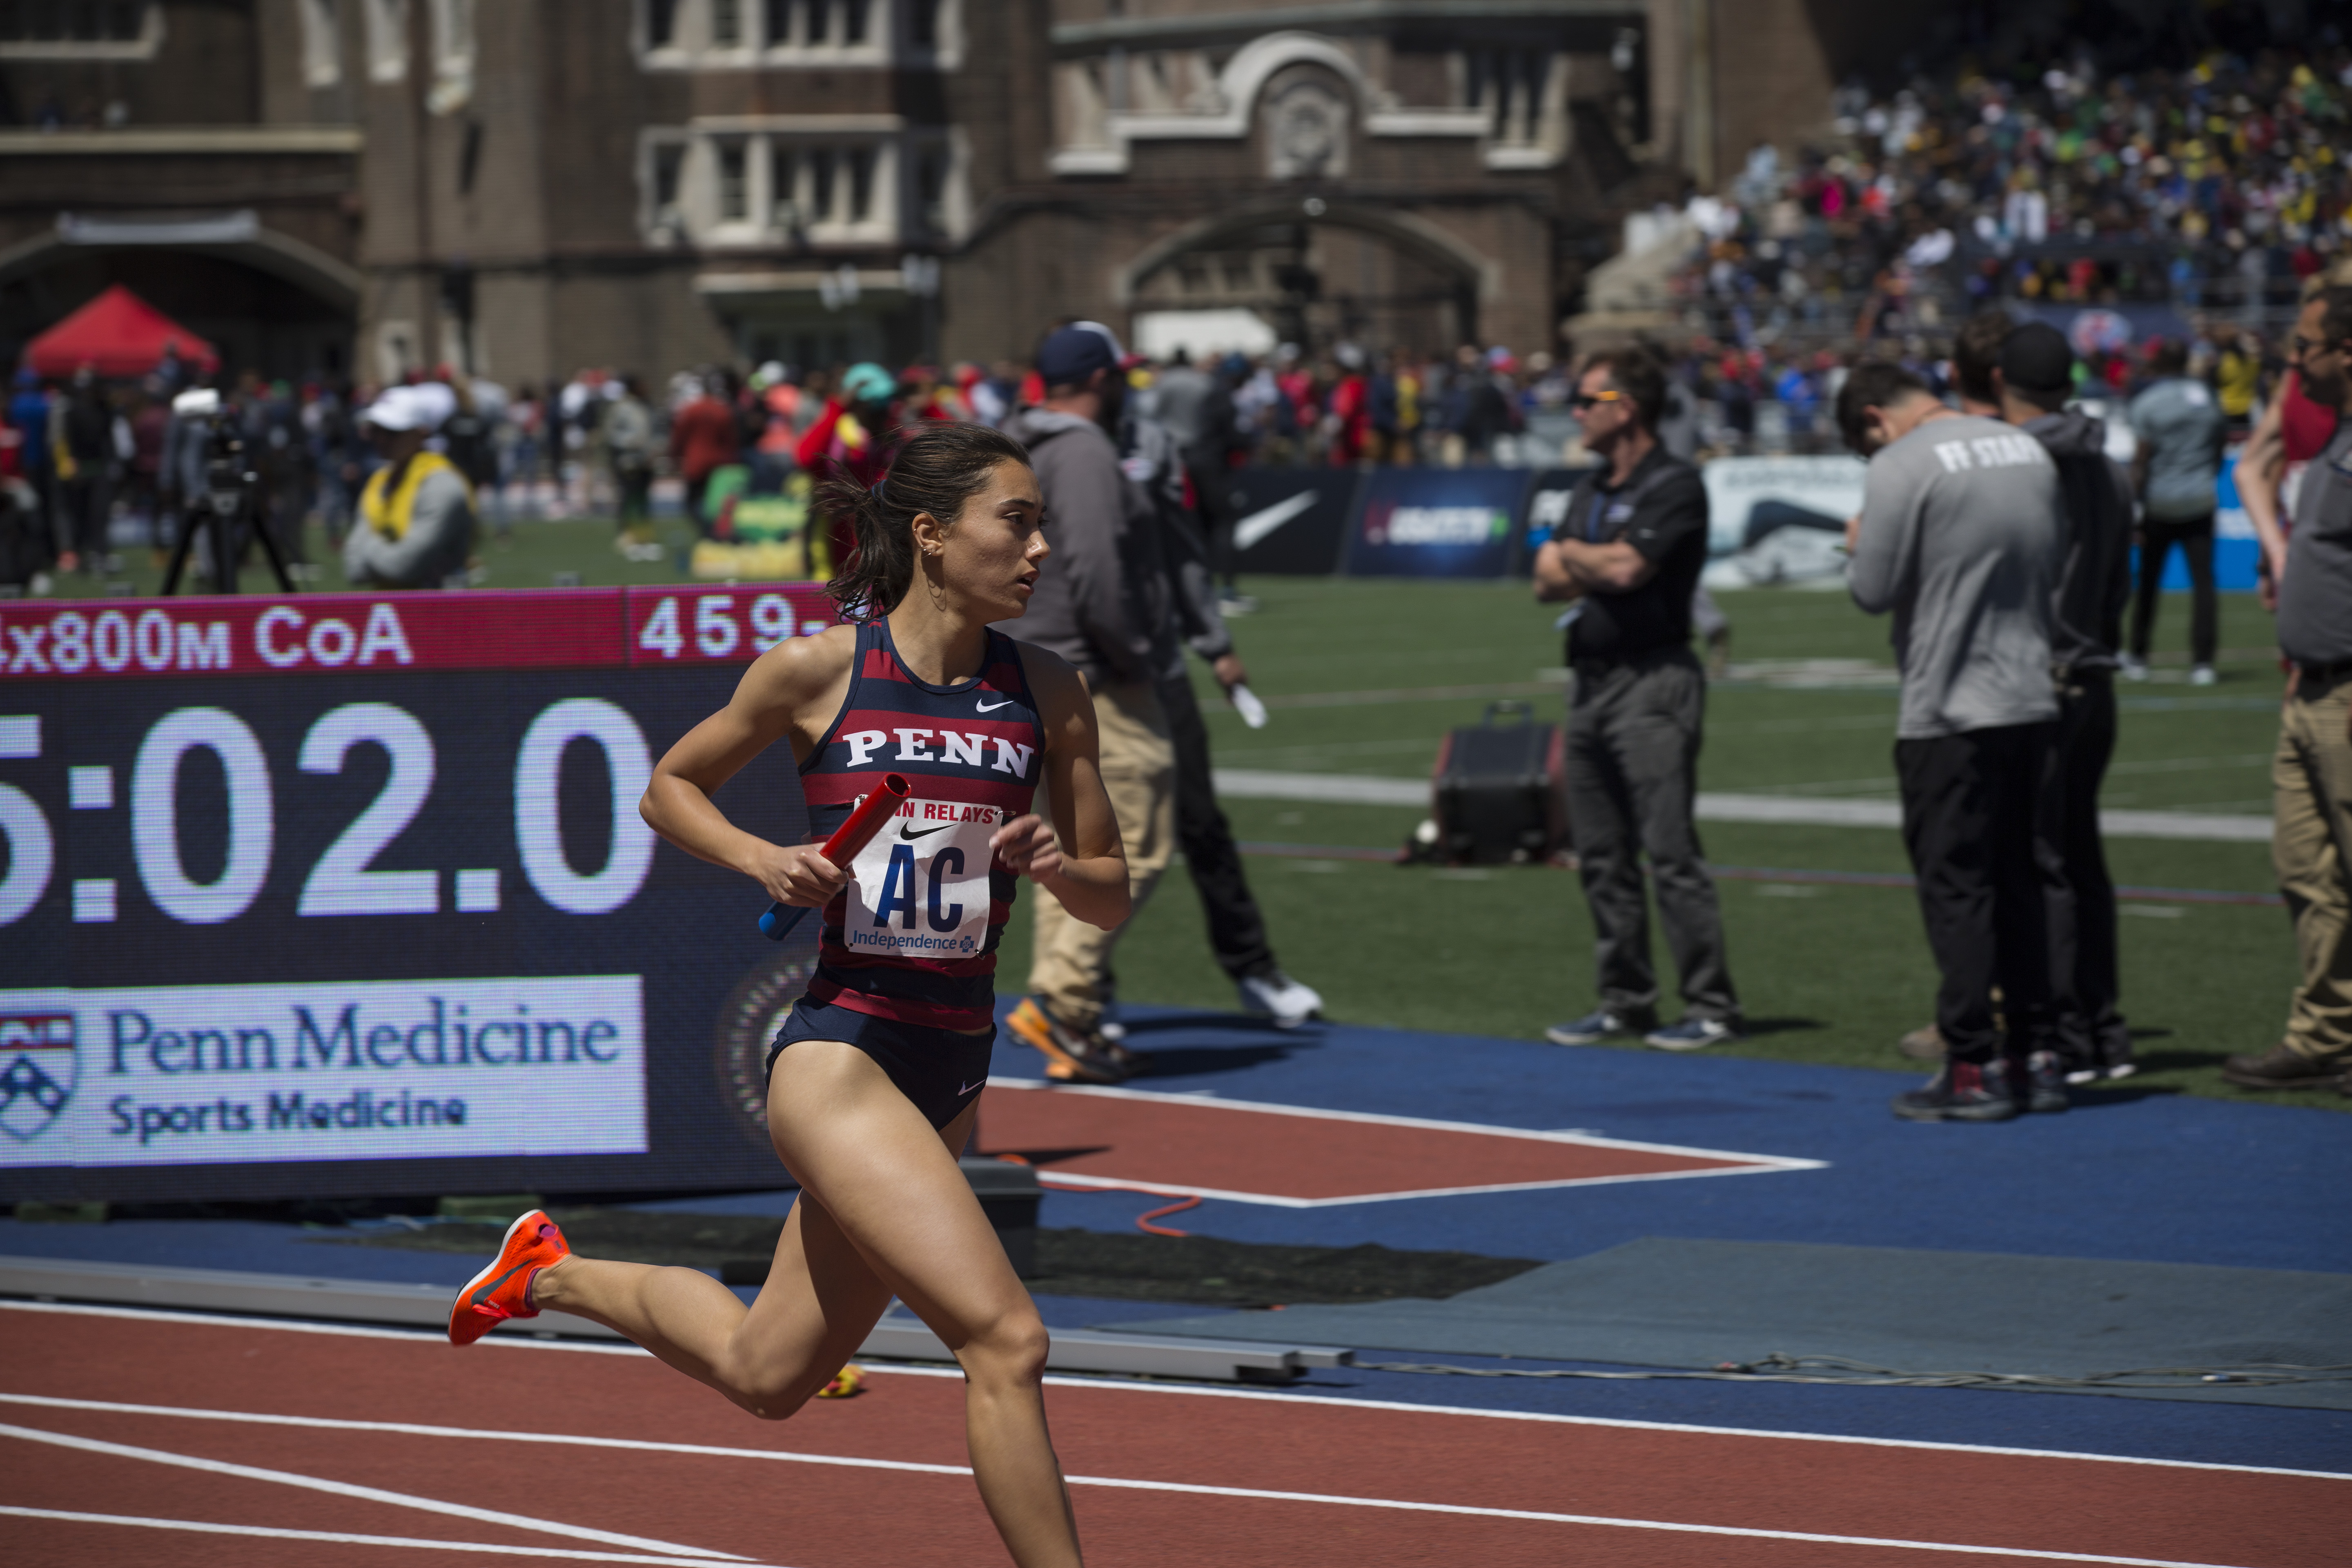  Melissa Tanaka competes in  the college women's 4x800m